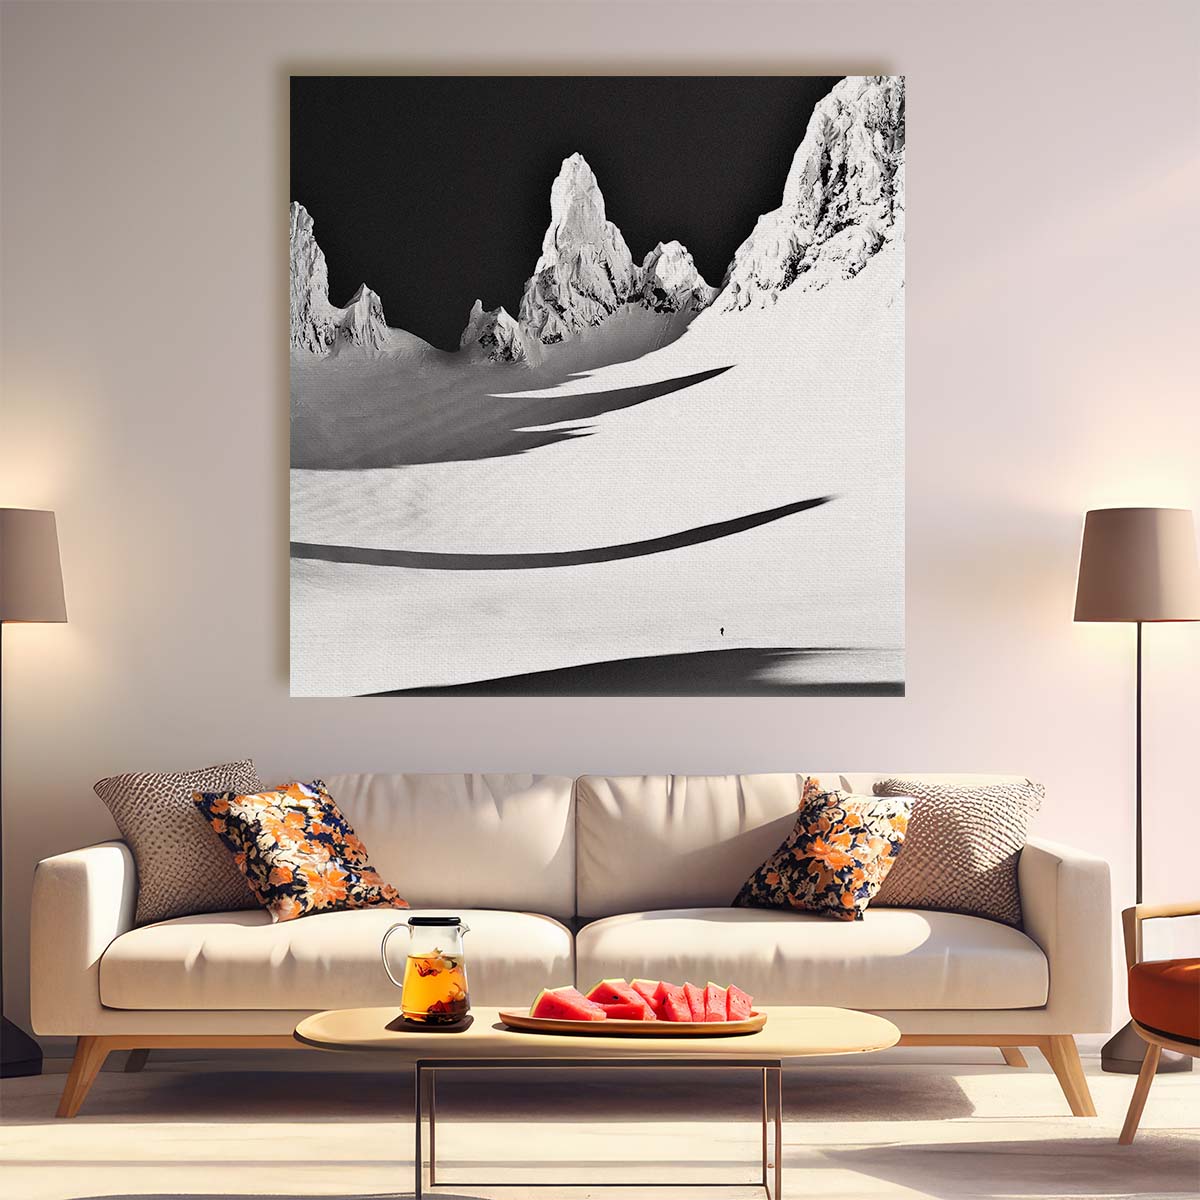 Monochrome Skier's Adventure in Snowy Mountain Landscape Wall Art by Luxuriance Designs. Made in USA.